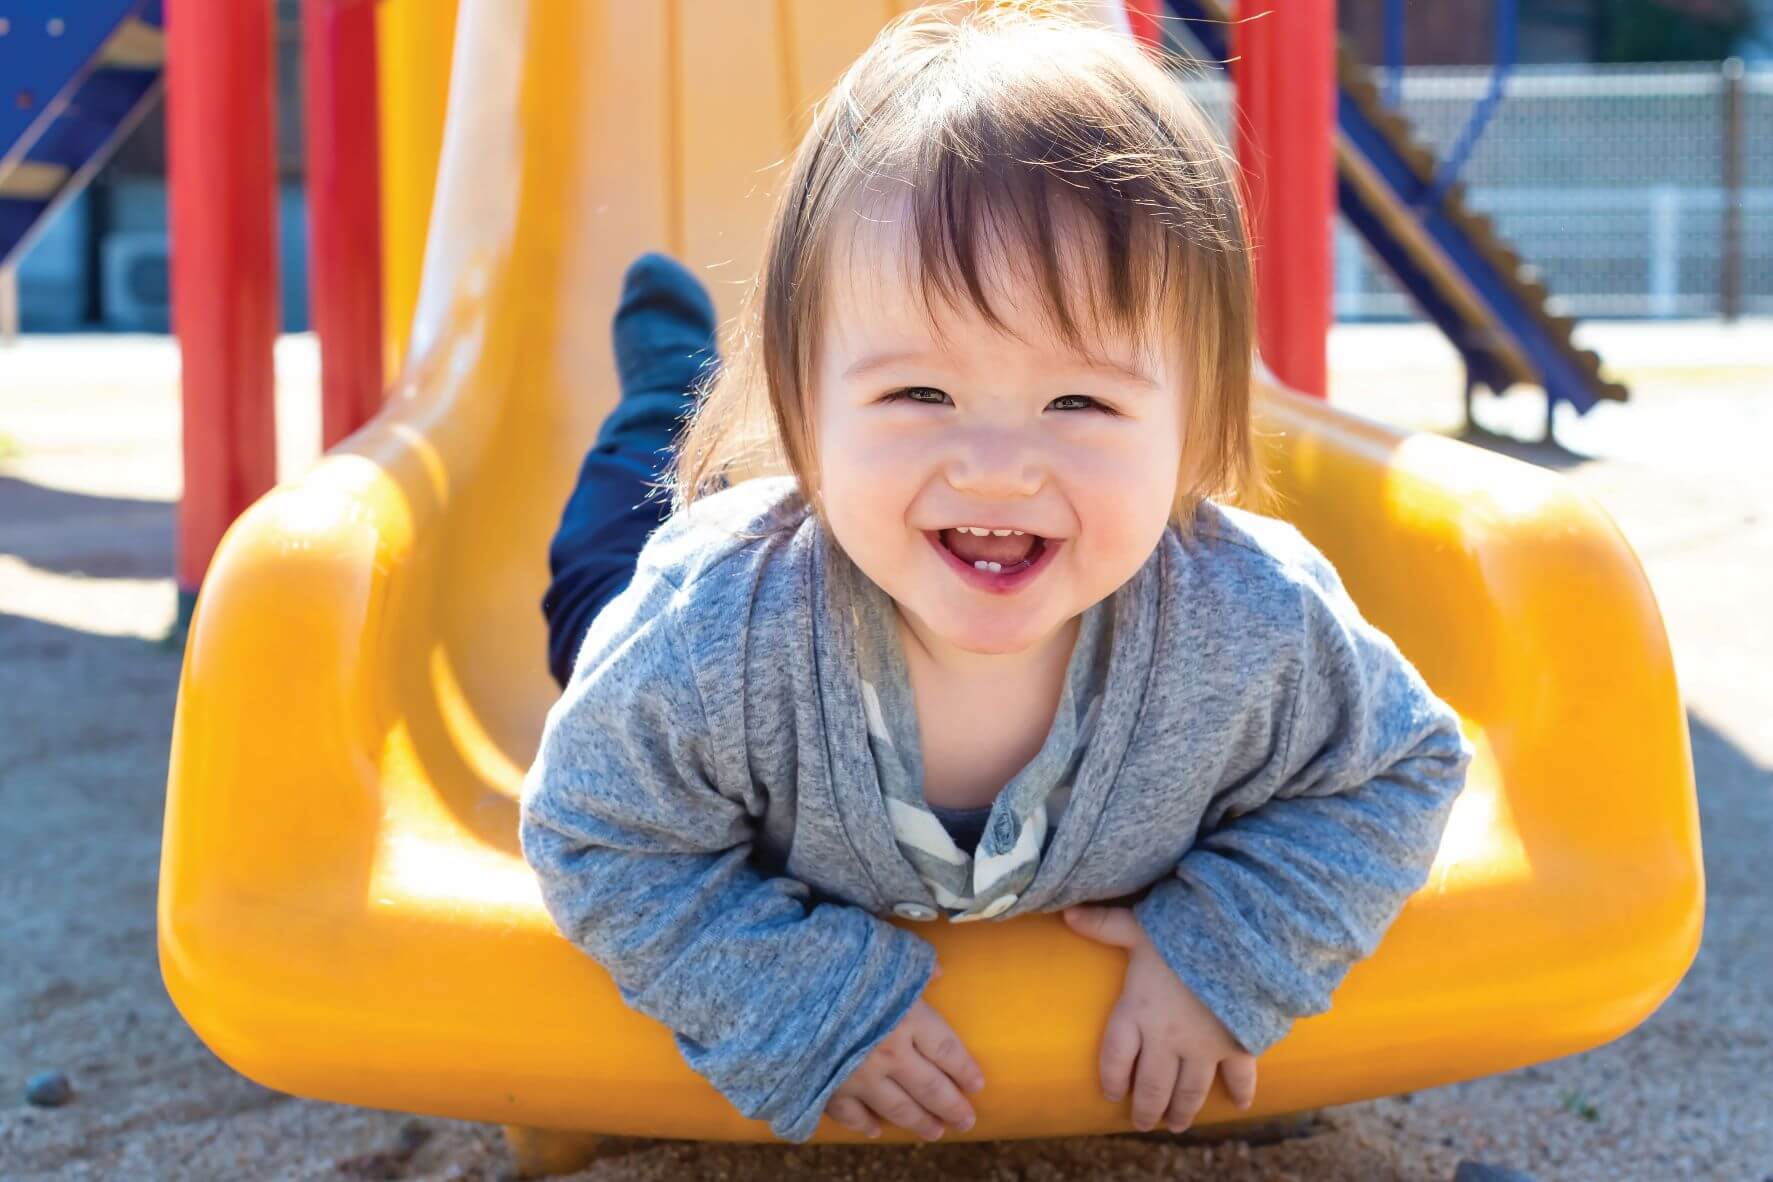 Child smiling at camera on a yellow slide